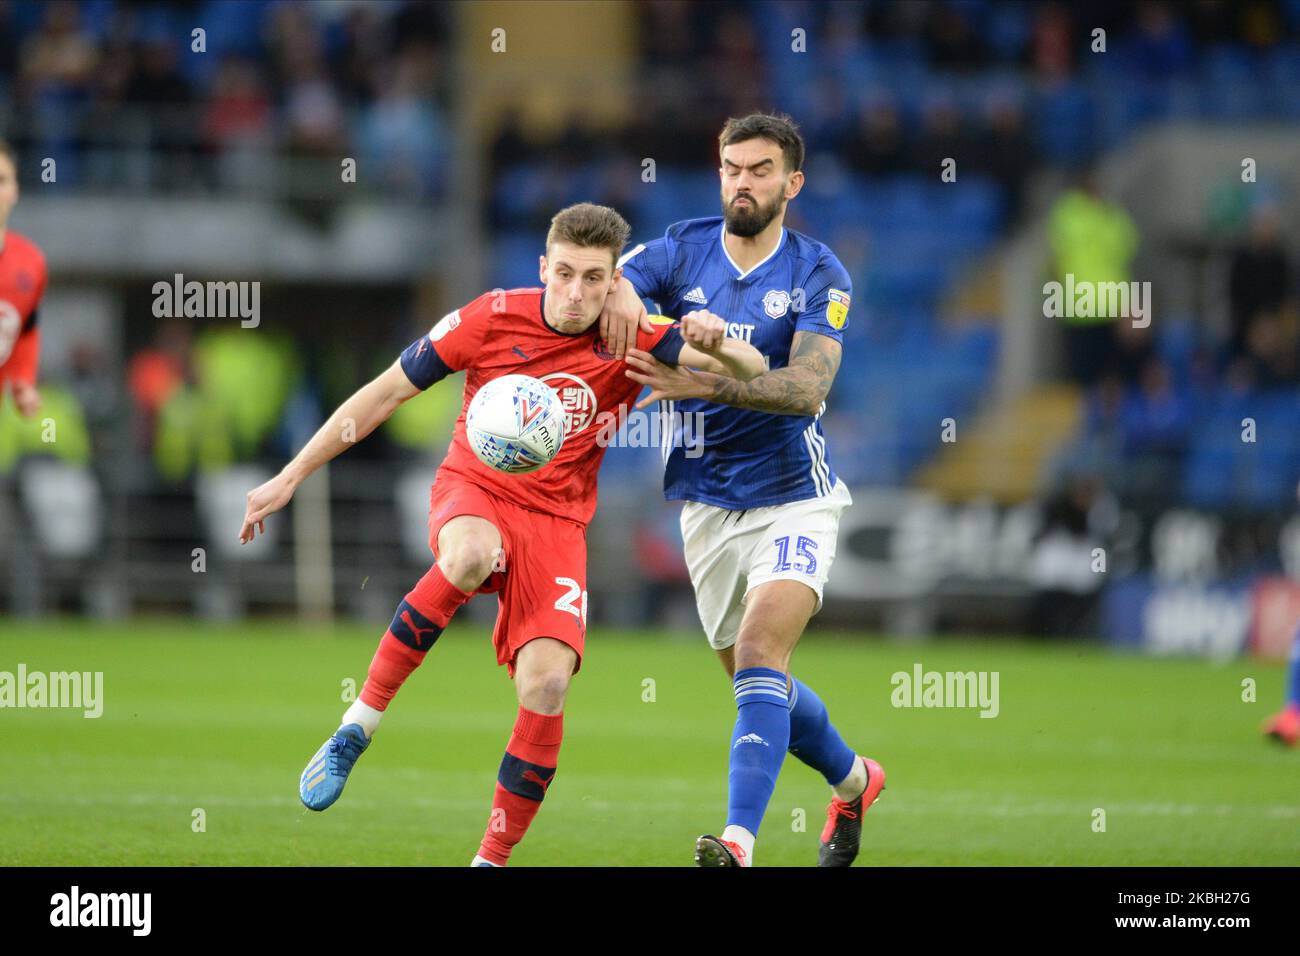 Cardiff, UK. 07th Aug, 2021. Marlon Pack #21 of Cardiff City under pressure  from Callum Styles #4 of Barnsley in Cardiff, United Kingdom on 8/7/2021.  (Photo by Mike Jones/News Images/Sipa USA) Credit